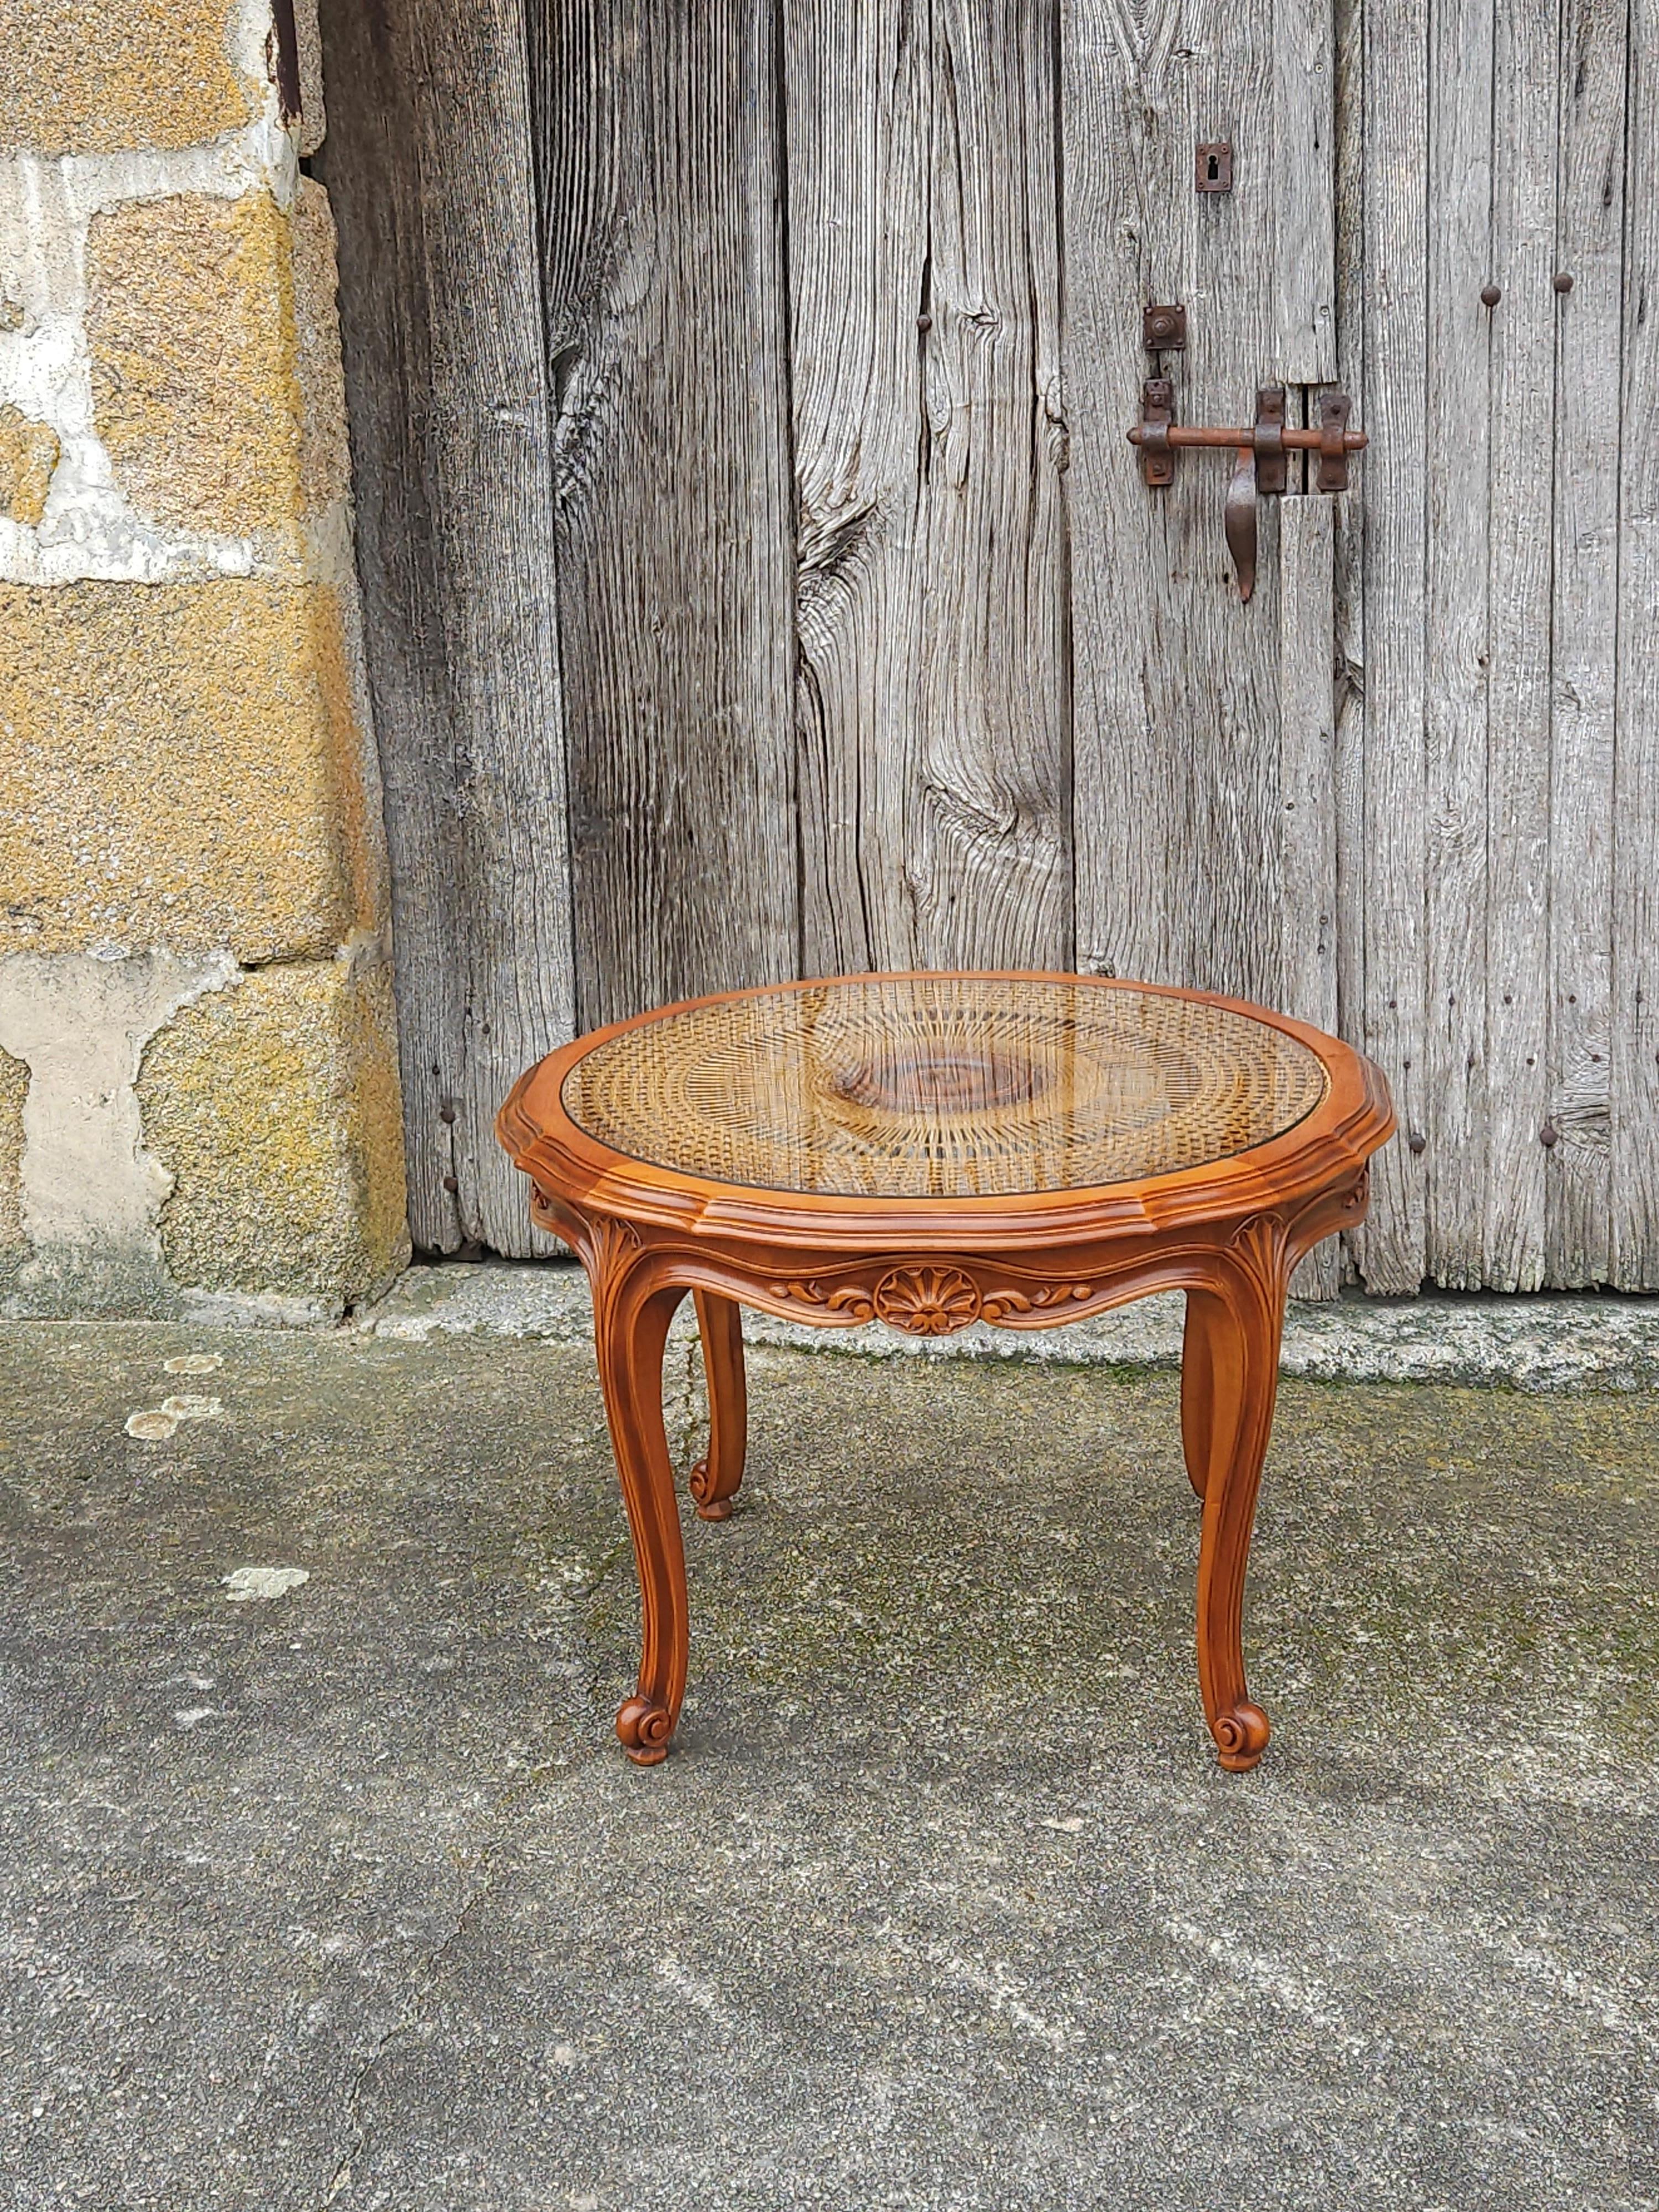 Beautiful and Authentic French round Coffee Table from the 60s
Made of Cherry Wood, richly decorated with Wood Carvings and beautifully curved Cabriole Legs
The Table has a Glass Insert, underneath an artistic Cane Wickerwork.
It has a Sunburst